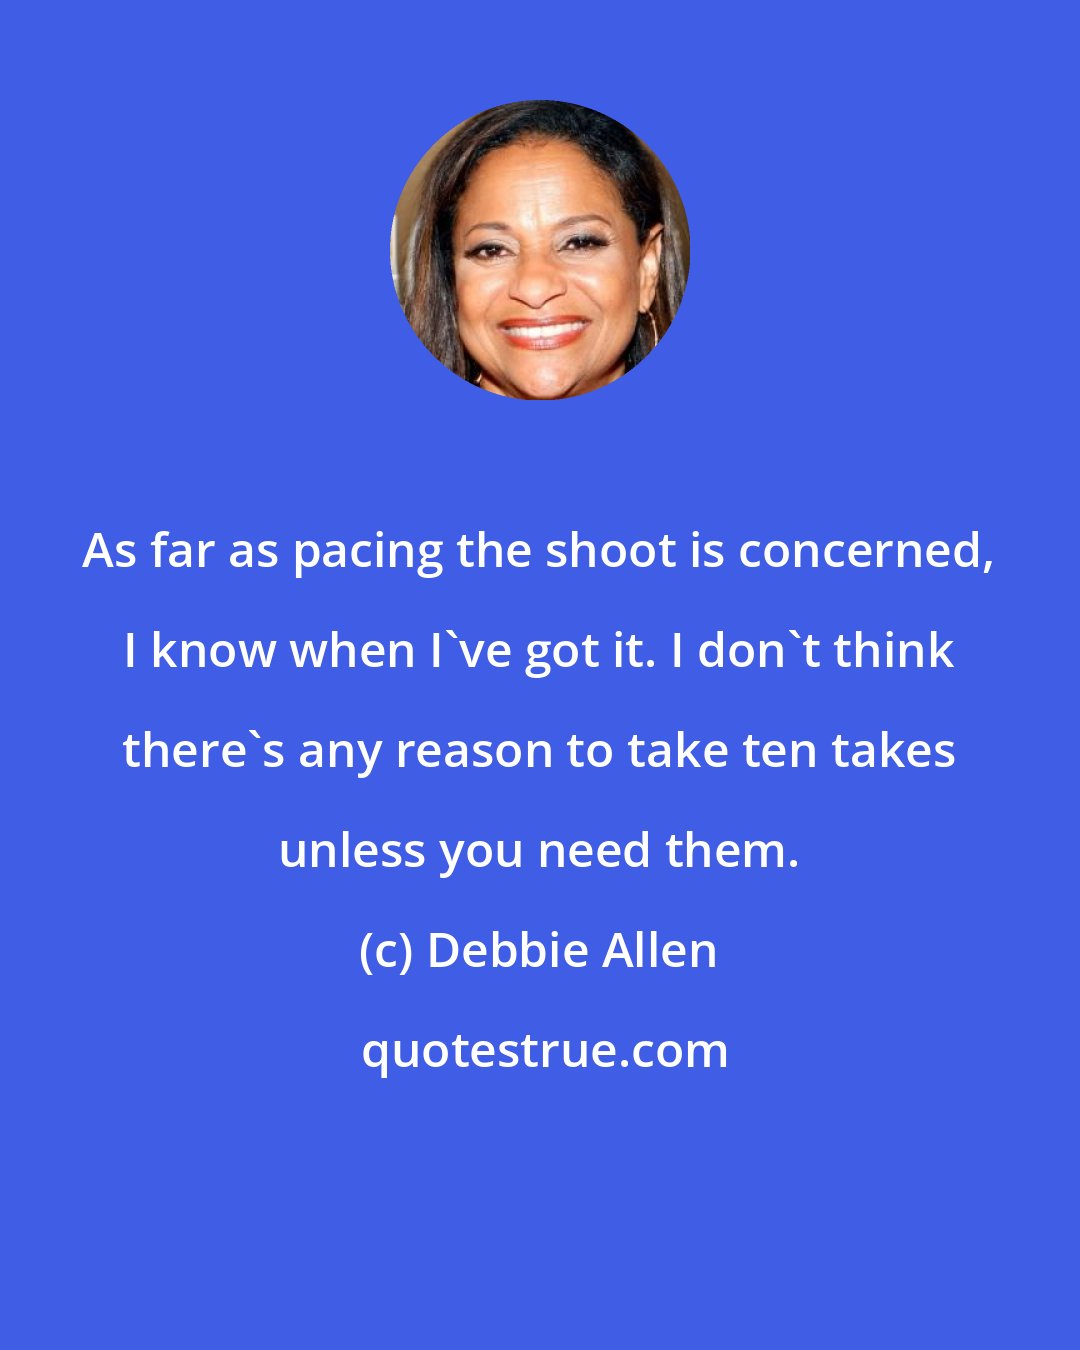 Debbie Allen: As far as pacing the shoot is concerned, I know when I've got it. I don't think there's any reason to take ten takes unless you need them.